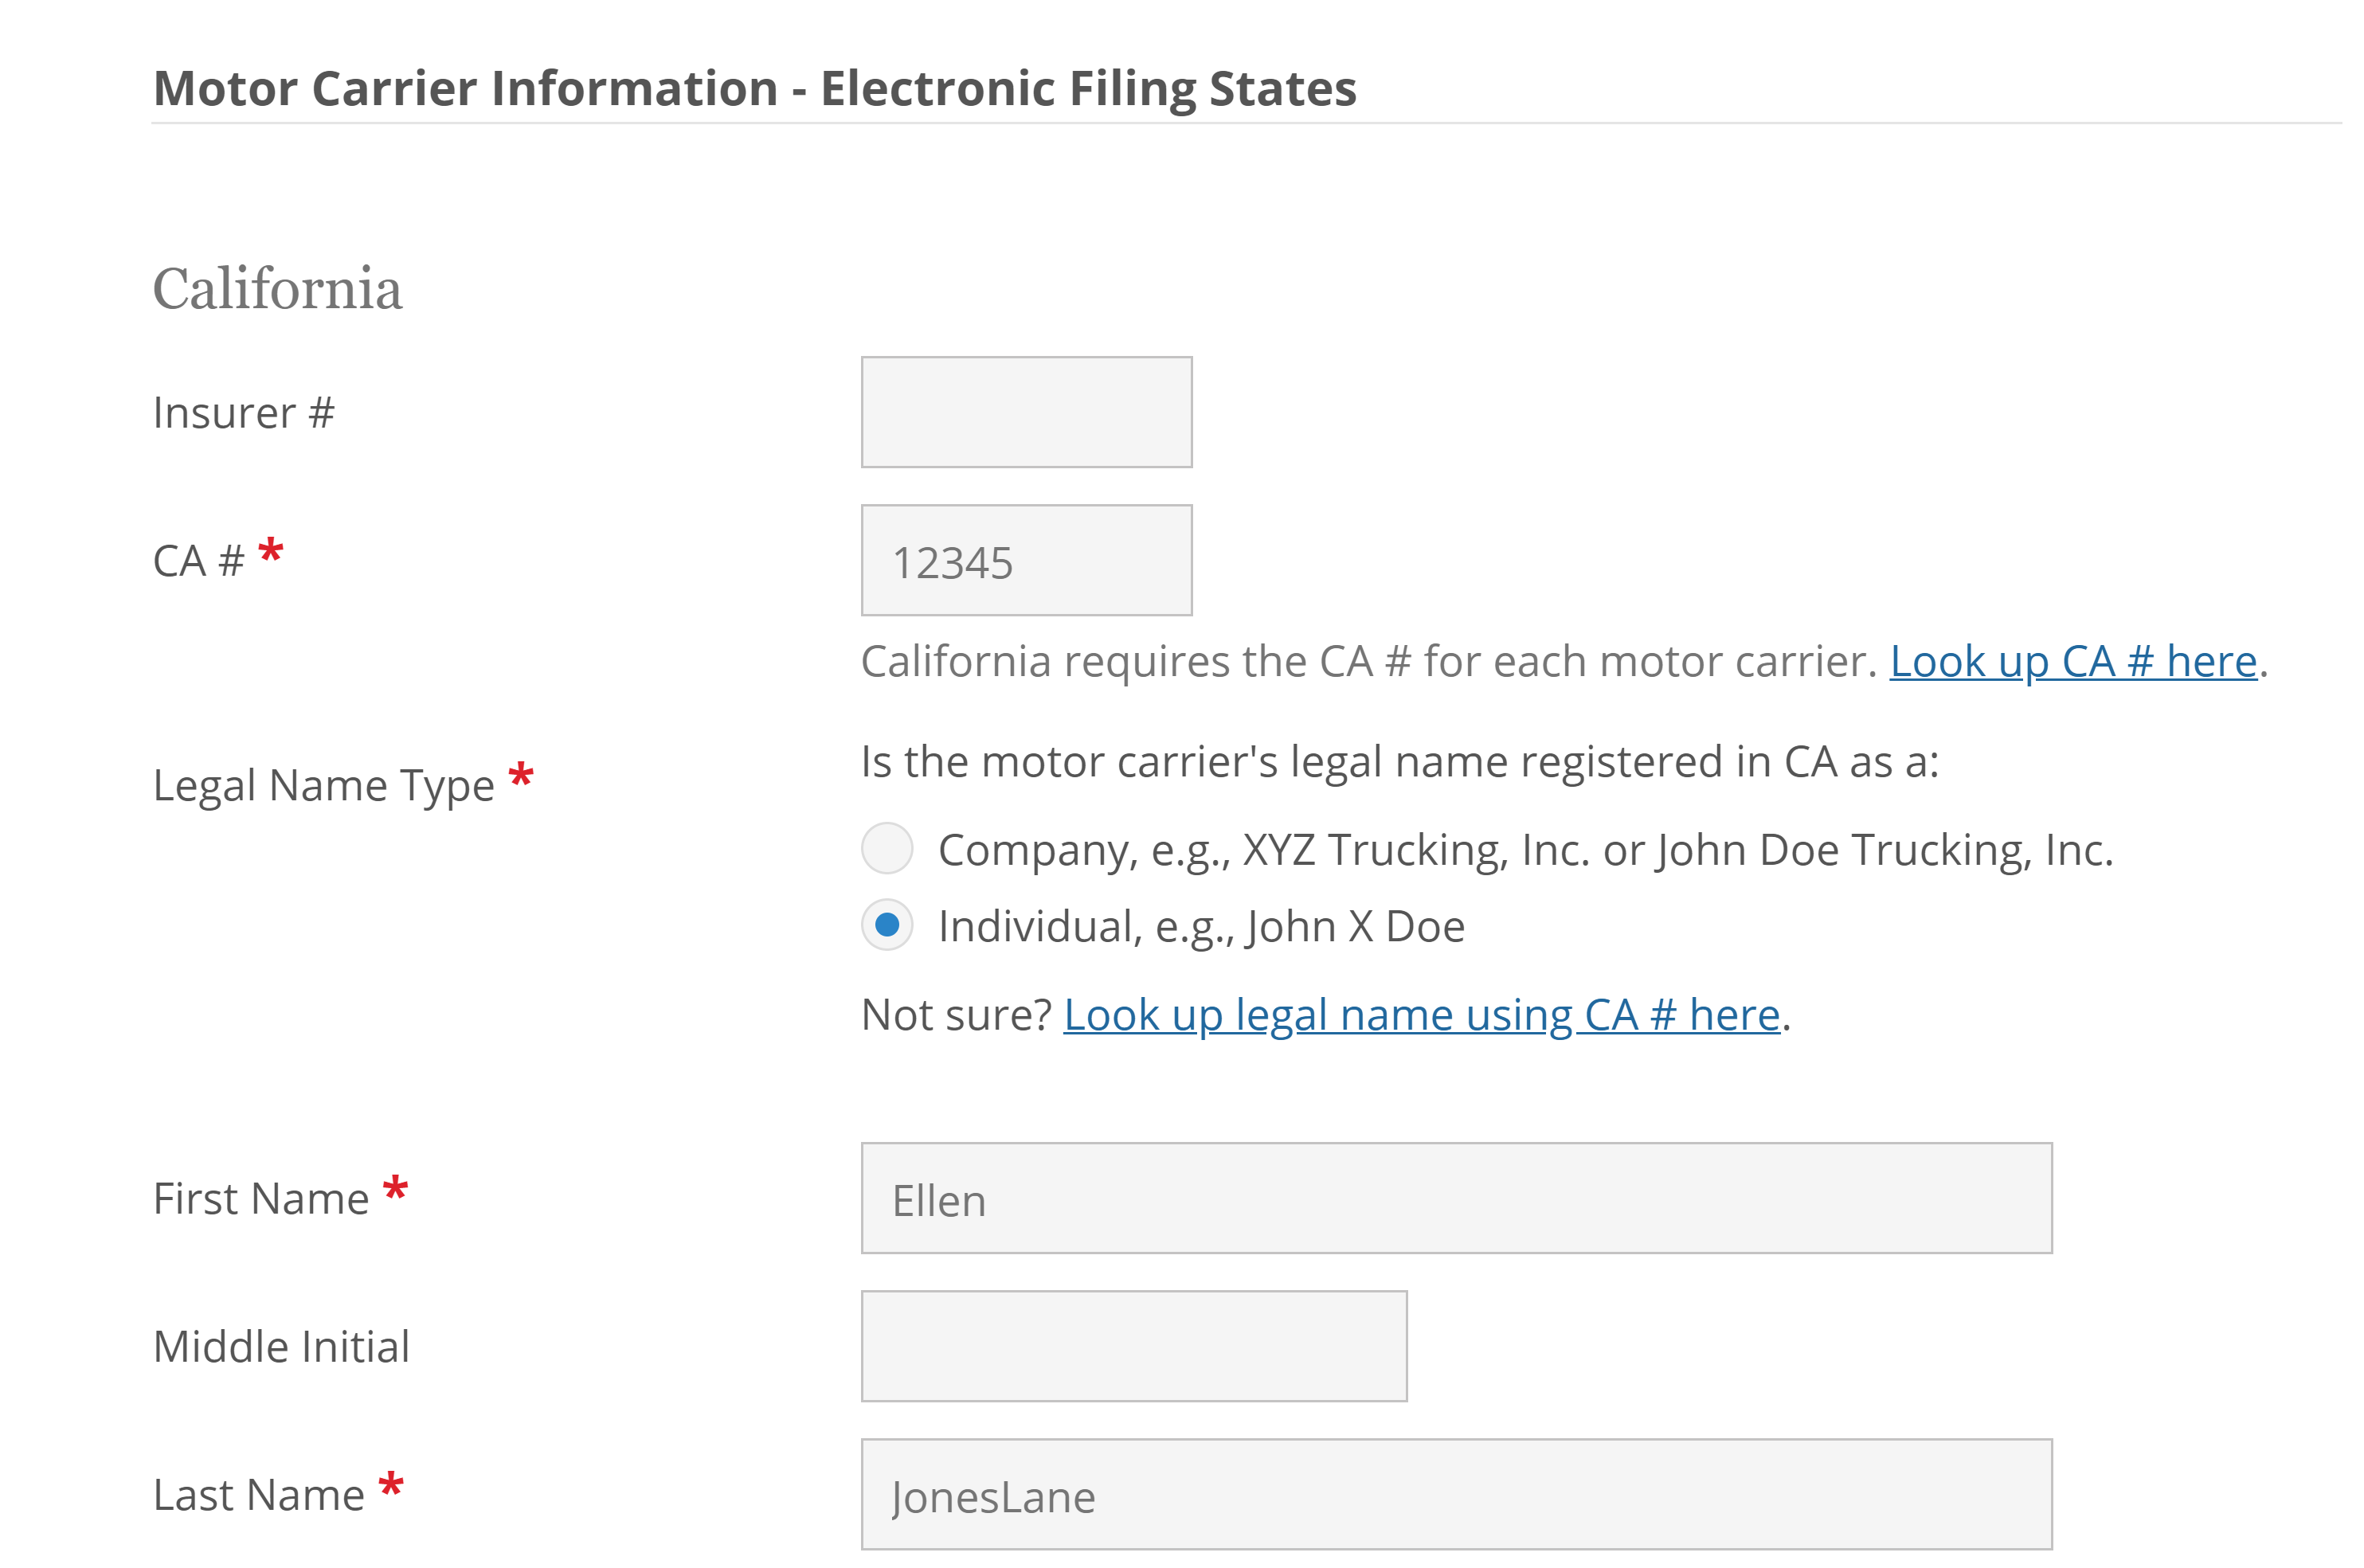 Screenshot of interface for California Motor Carrier Information and new individual legal name.